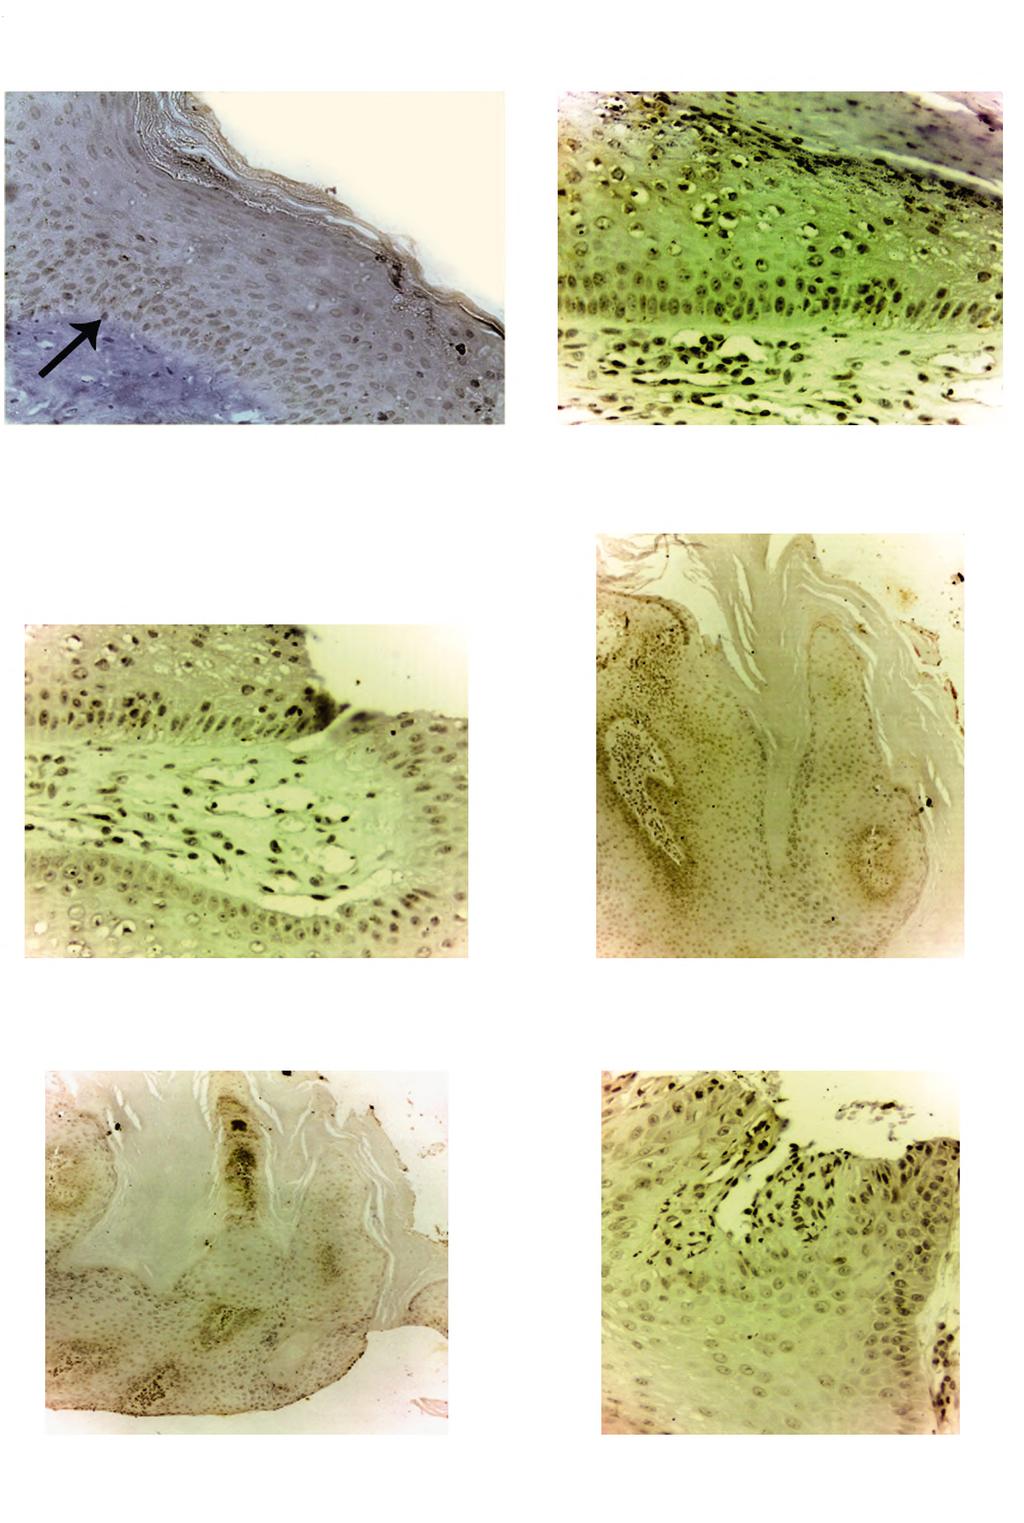 Ahmed A. Saleh, et al. 925 Immunohistochemical staining of TLR 3 using Avidin-Biotin complex. Fig.